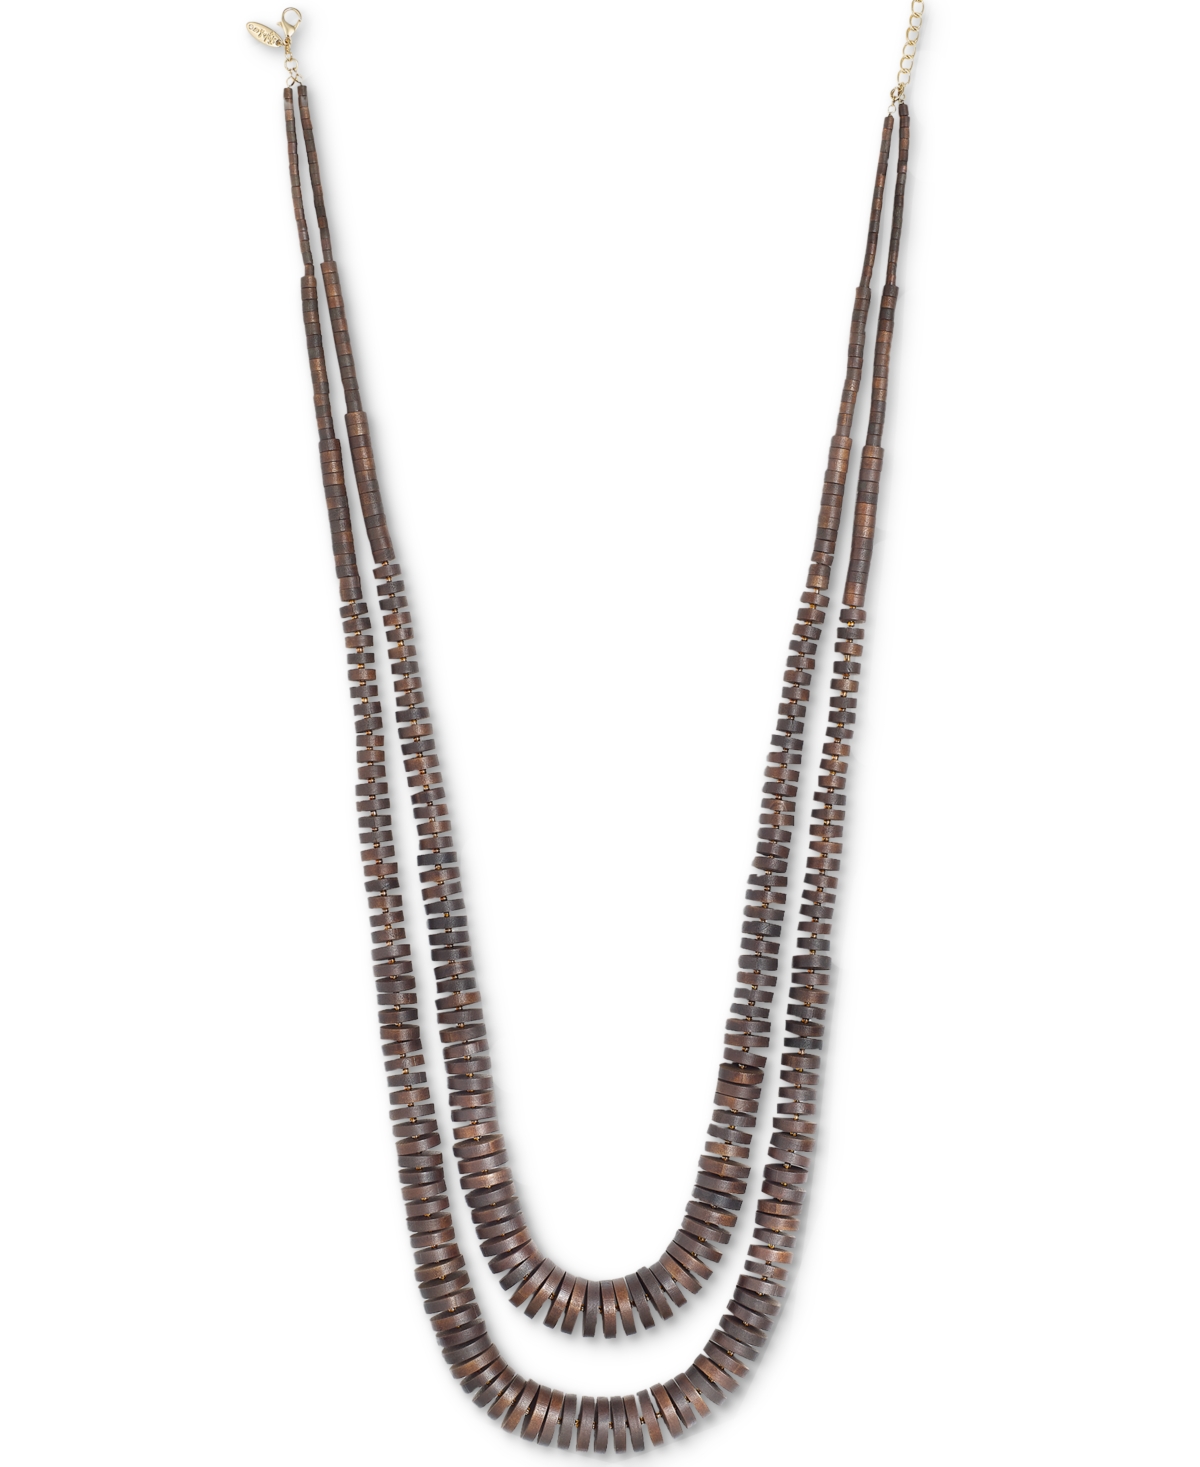 Gold-Tone Color Beaded Layered Strand Necklace, 36" + 3" extender, Created for Macy's - Brown